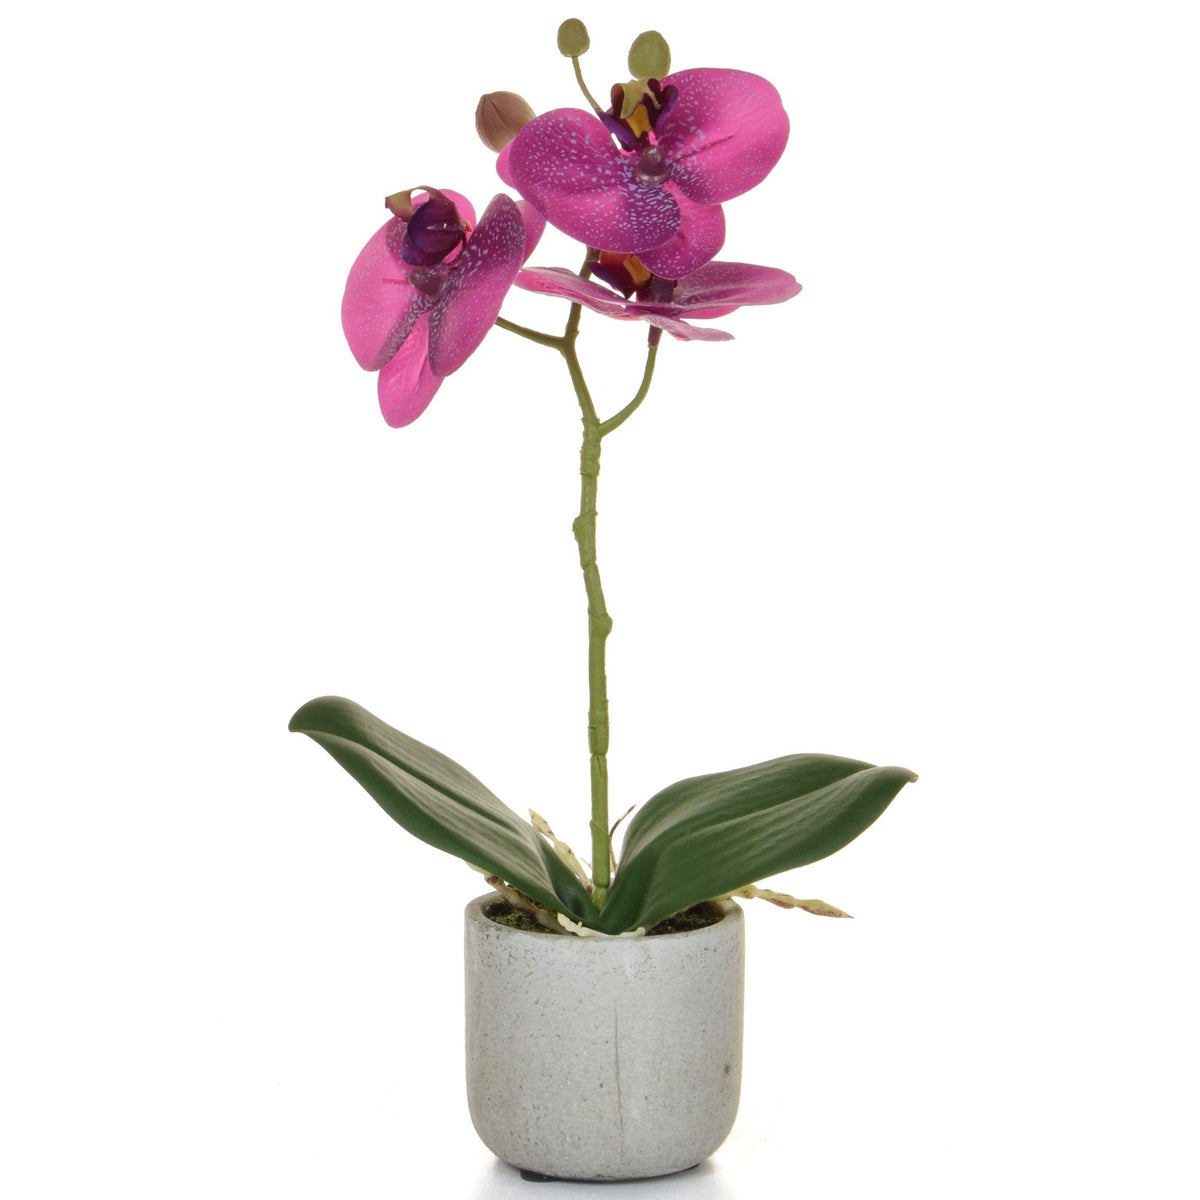 A highly realistic, faux orchid with deep pink flowers speckled with white and pale yellow buds. The orchid has a straight, central stem with two large dark green leaves at the base. It comes in a pale grey pot and stands 30 cm tall.